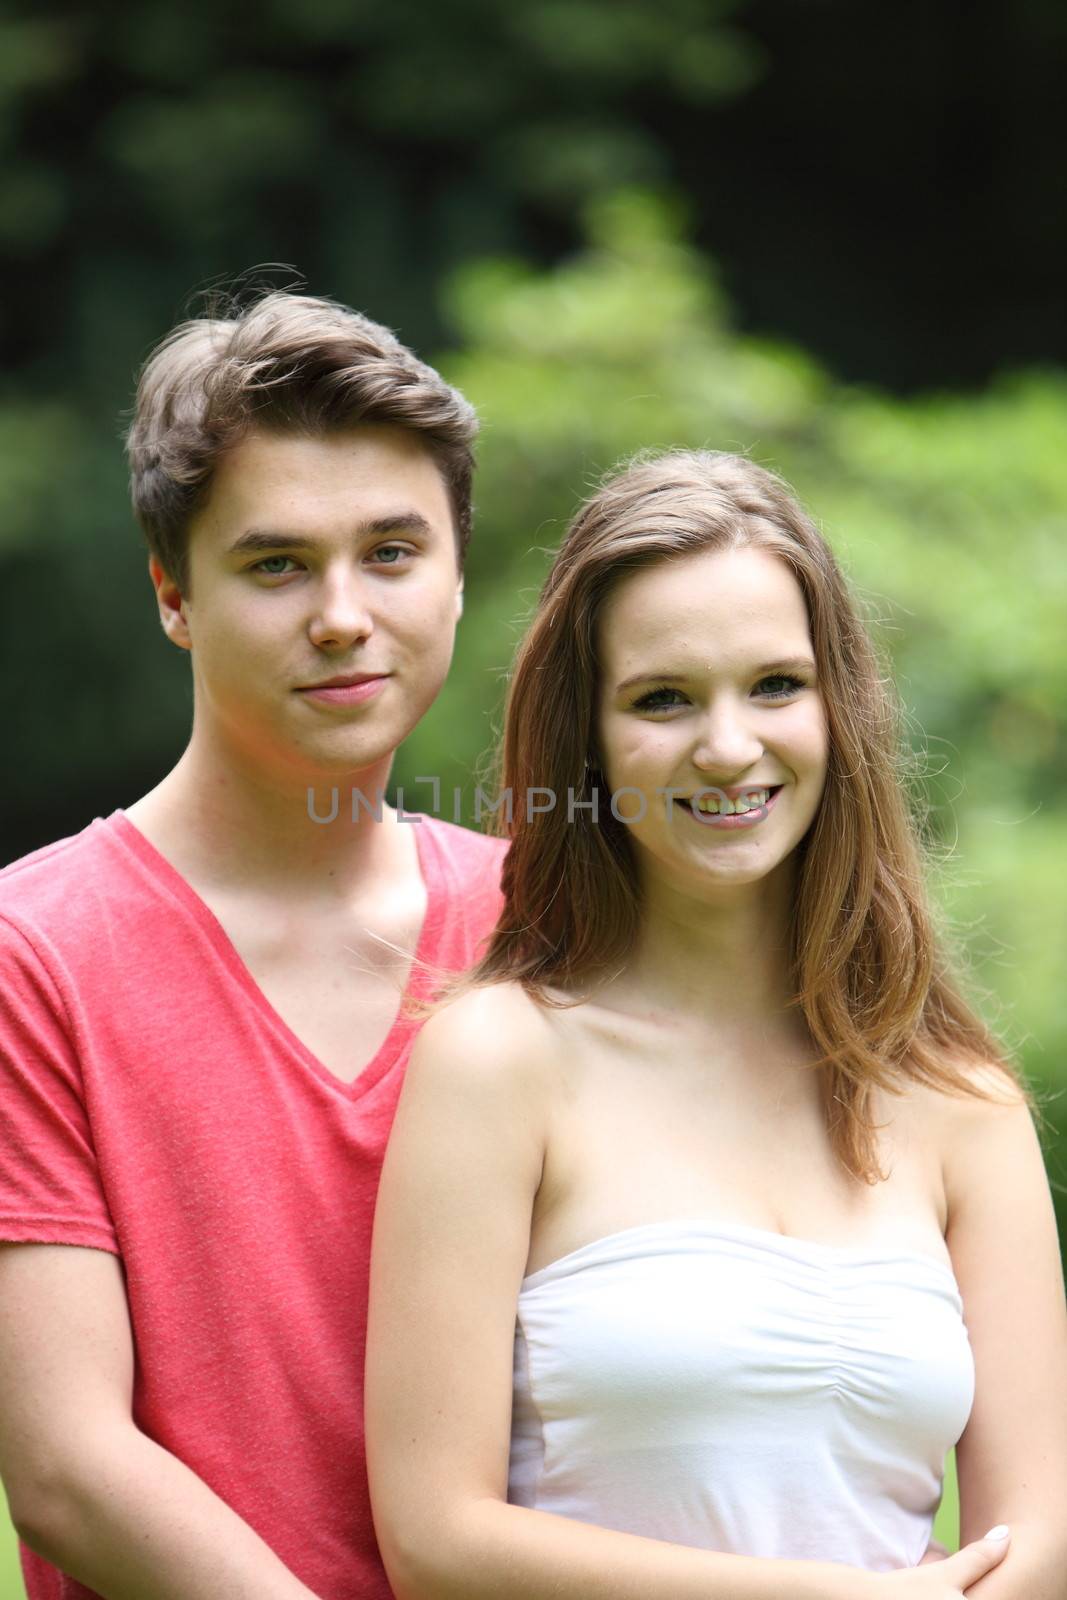 Beautiful young teenage couple standing close together smiling happily at the camera outdoors in a green park in the sunshine